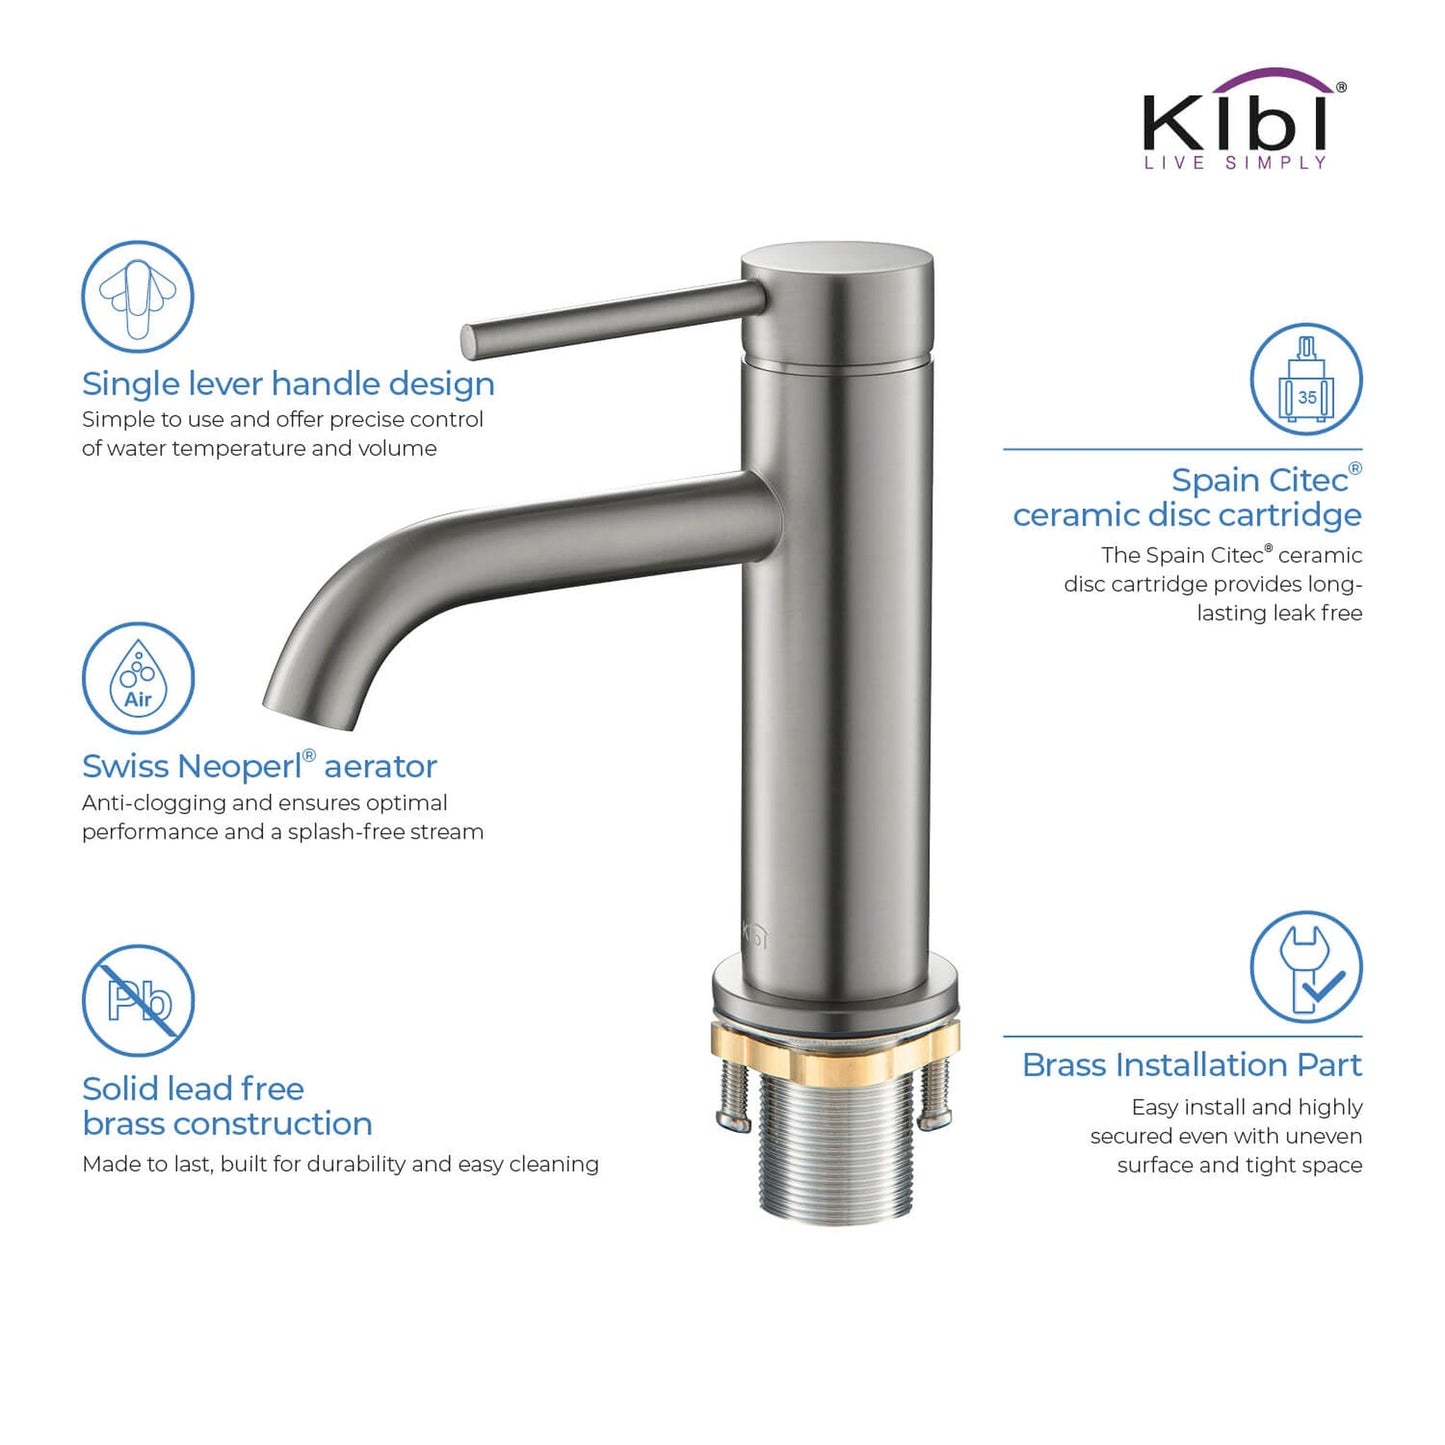 KIBI Circular Single Handle Brushed Nickel Solid Brass Bathroom Sink Faucet With Pop-Up Drain Stopper Small Cover With Overflow